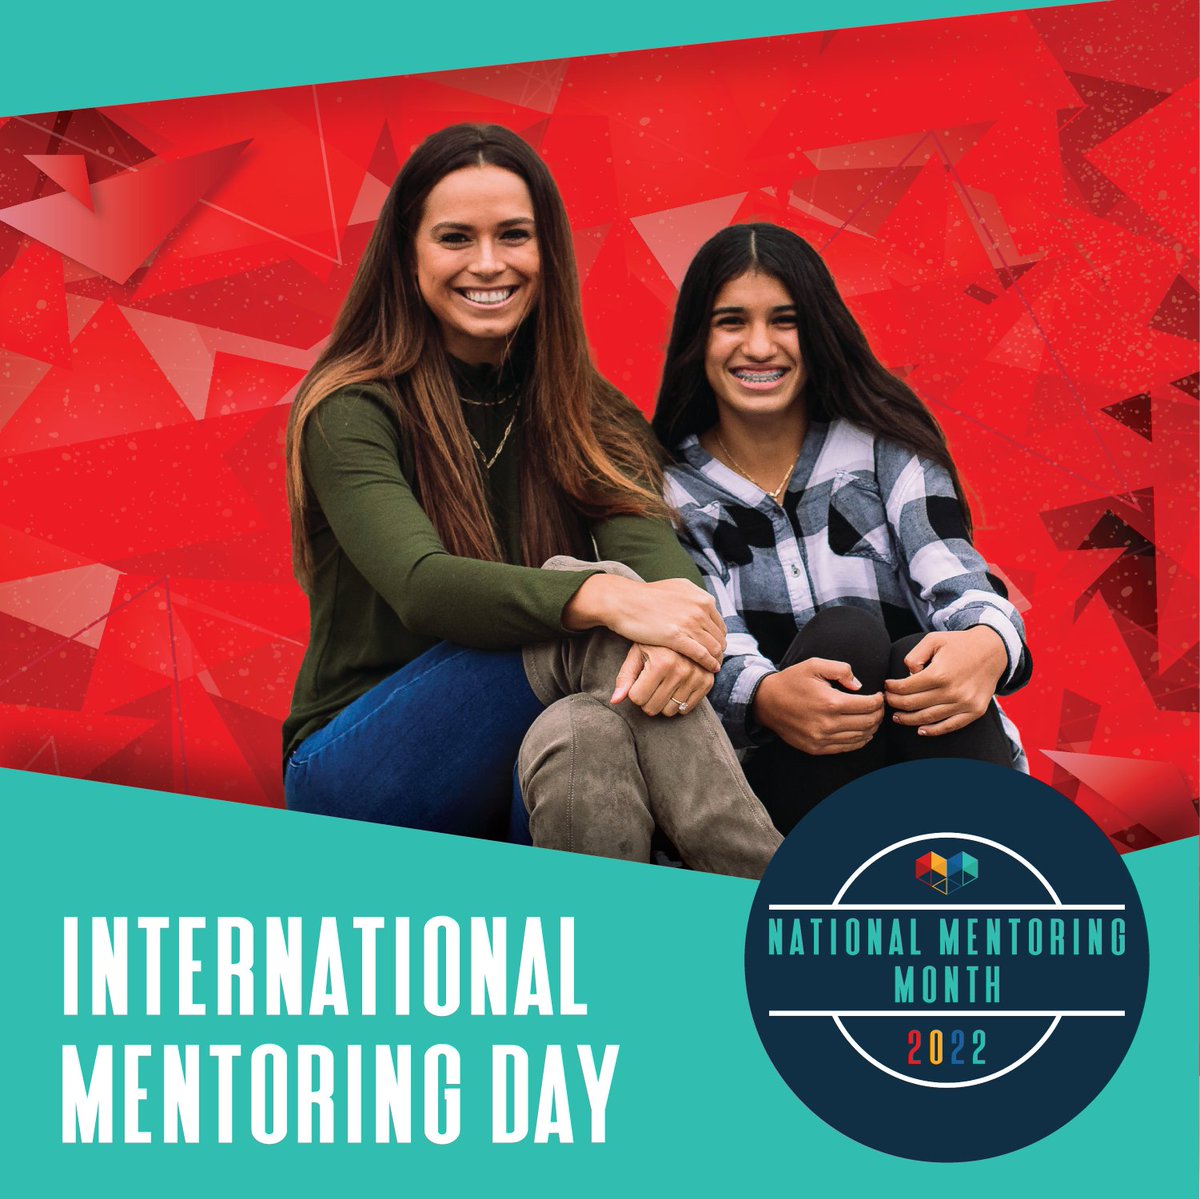 Today is International Mentoring Day! Around the world, mentoring support systems uplift youth and strengthen communities! Share your story or consider joining in the movement! #MentoringMonth